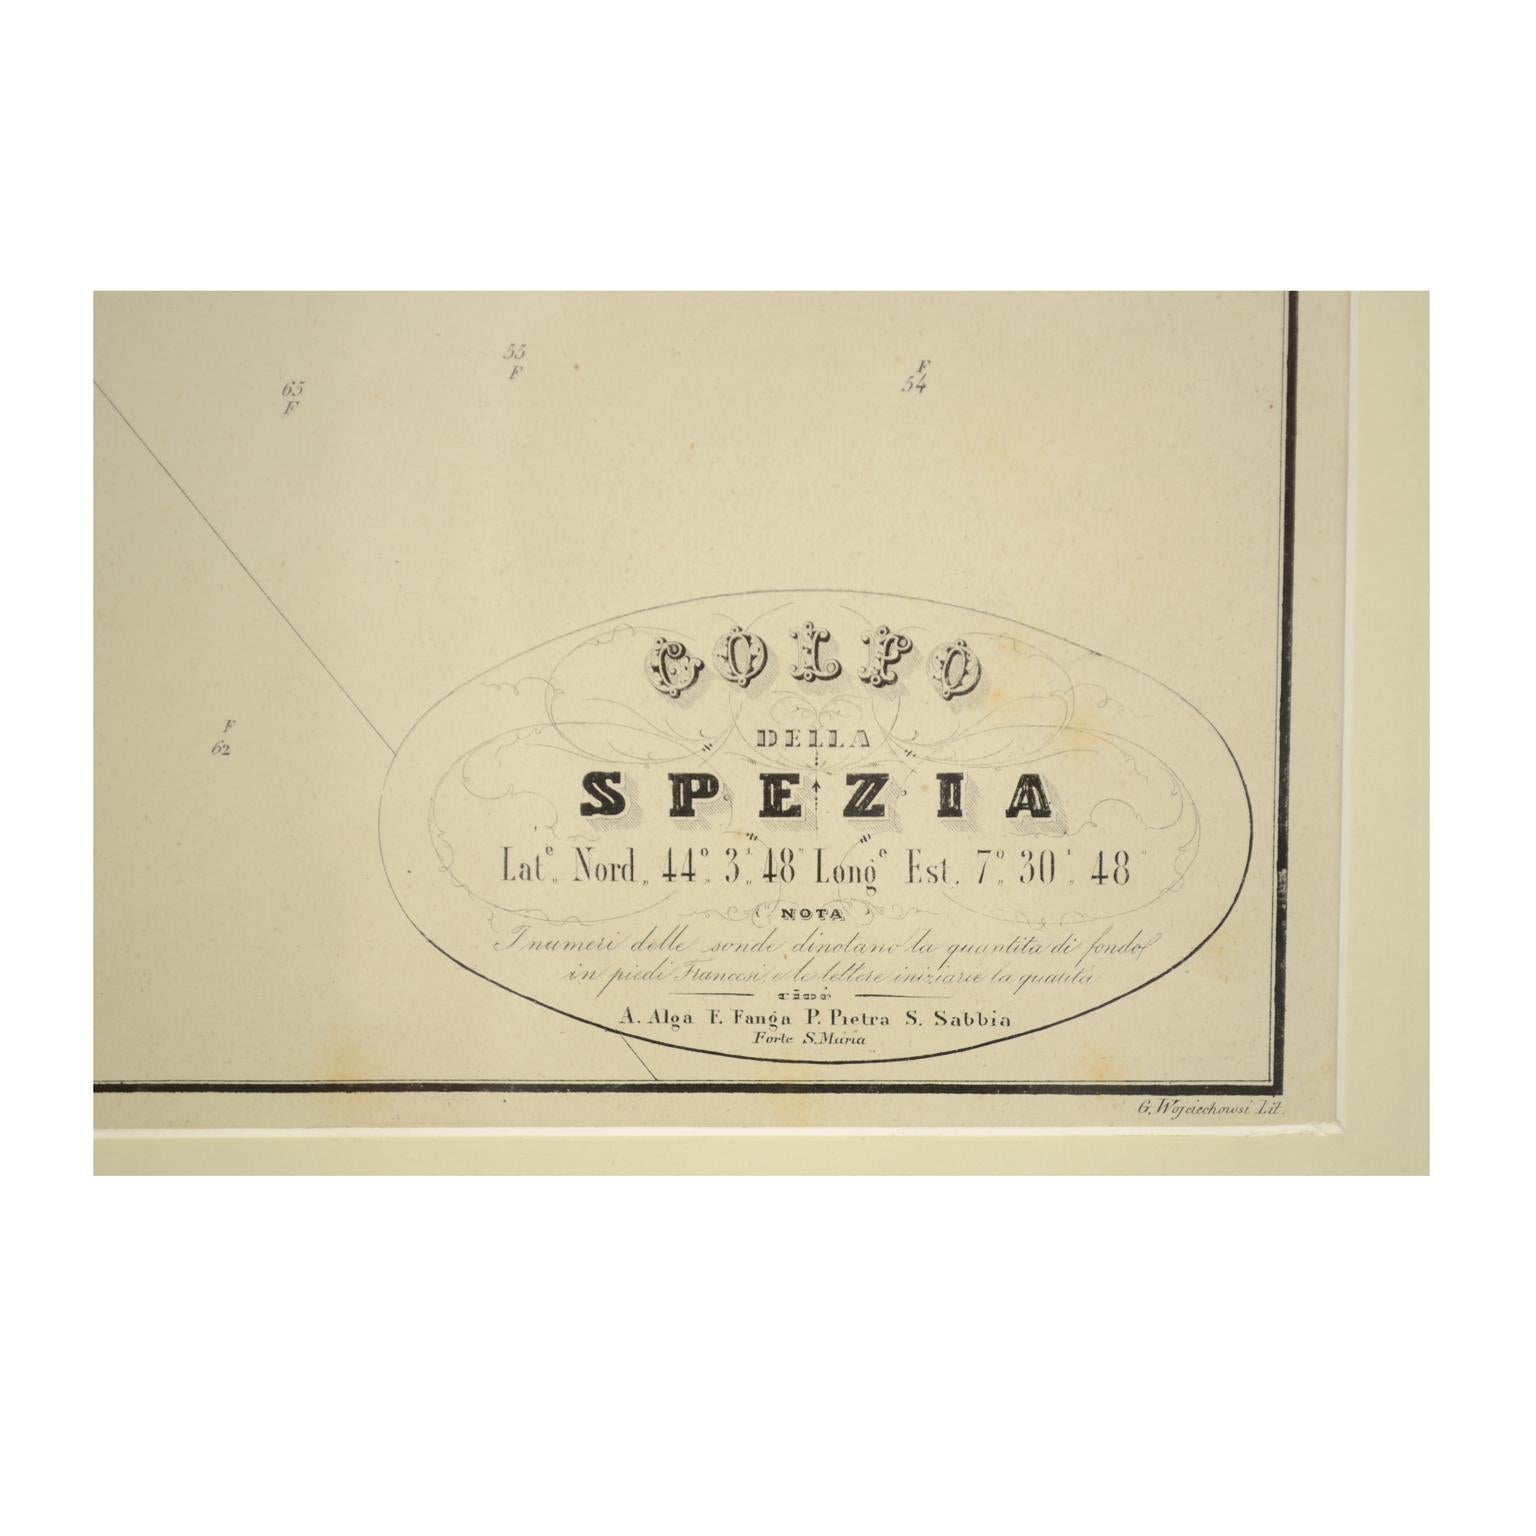 Golfo Della Spezia, ancient portolano for use by seafarers with indications for anchoring in port made by the Litografia Armanino active in Genoa between 1843 and 1880, on behalf of the Savoy Marina, because the cartography was no longer adapted to